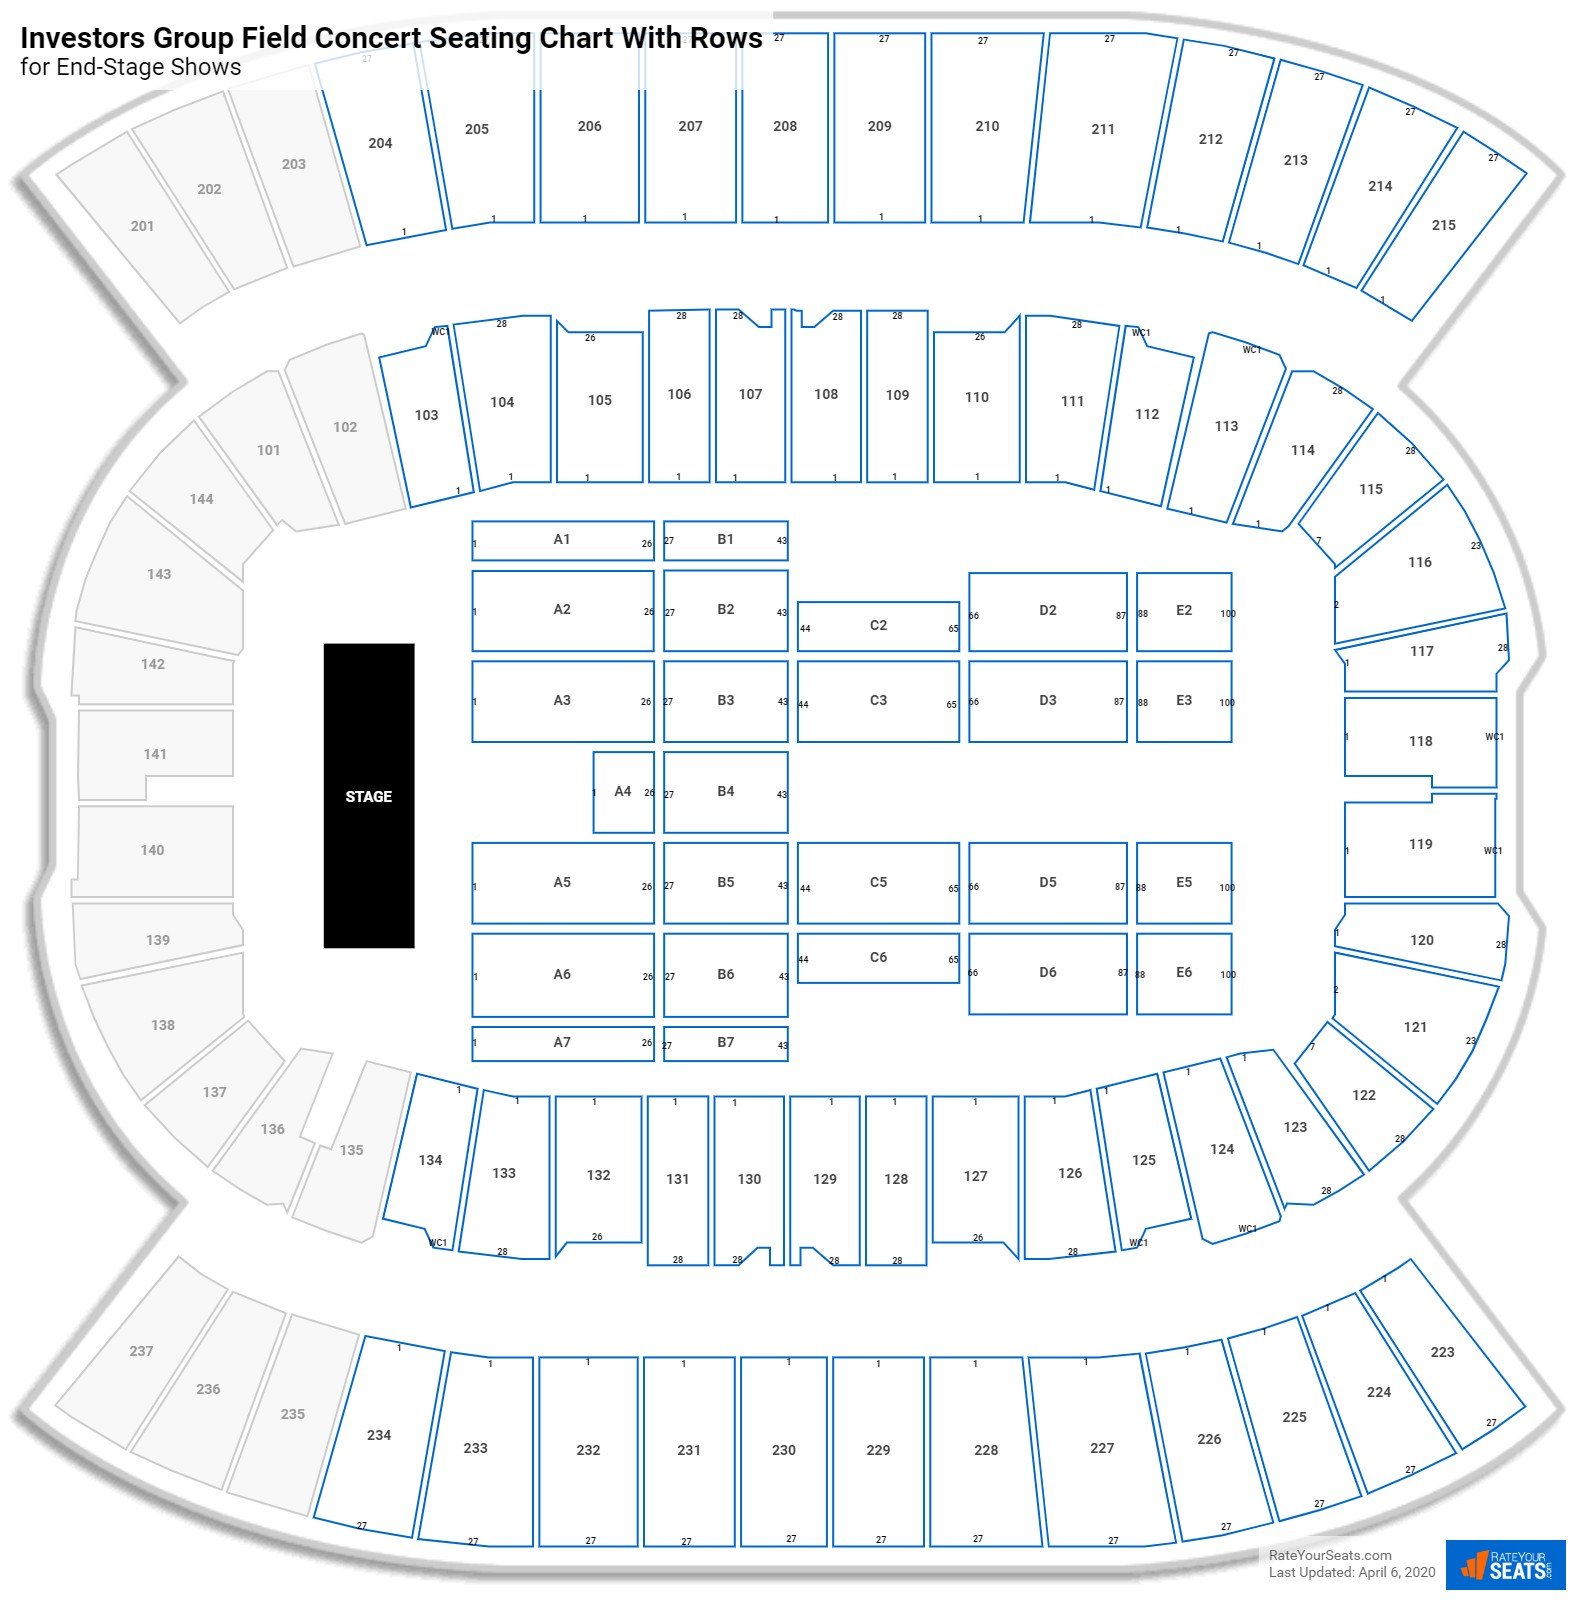 Investors Group Field seating chart with row numbers